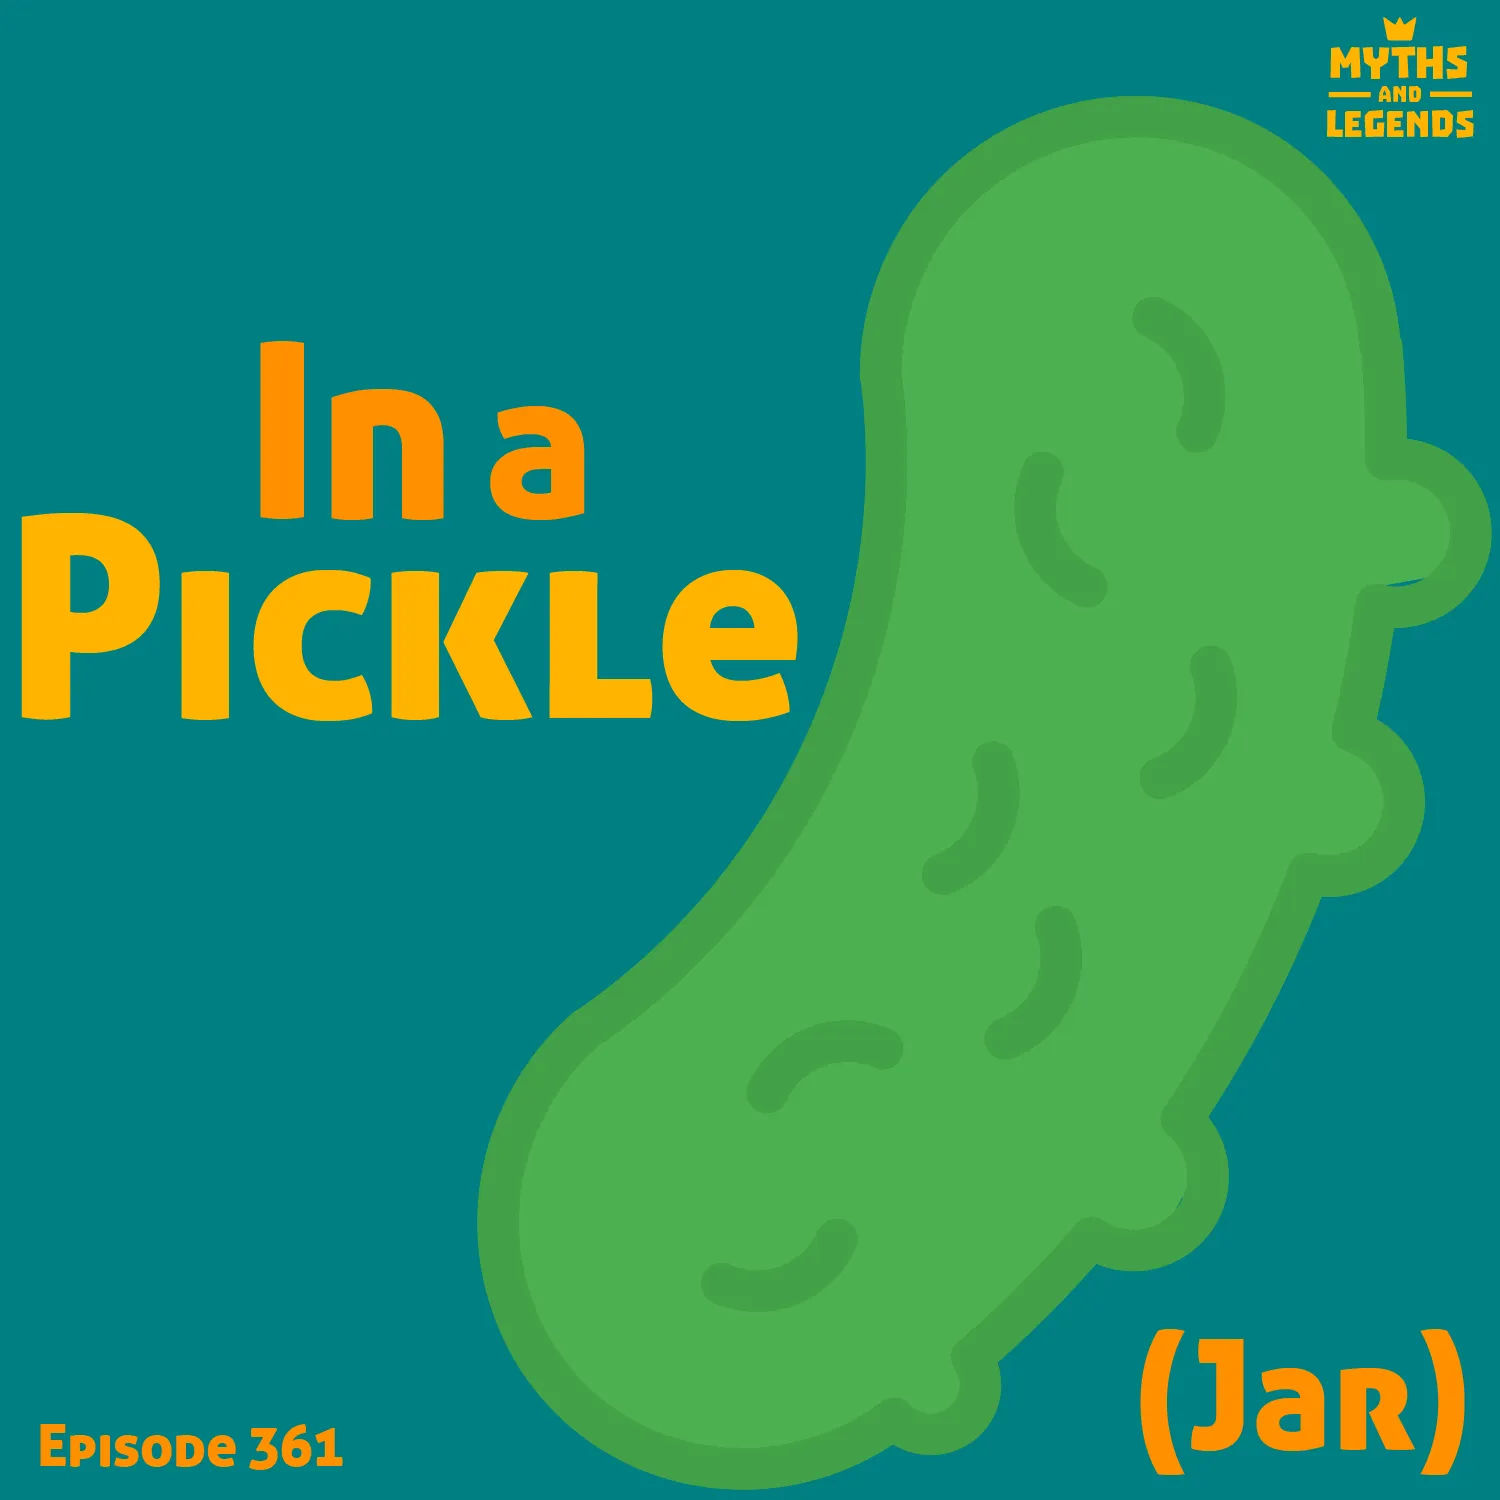 A simple vector pickle with the words "In a pickle" to the left and "(jar)" to the right. All this is set on a blue background. "Episode 361" is in the bottom left and the Myths and Legends logo is in the top right.